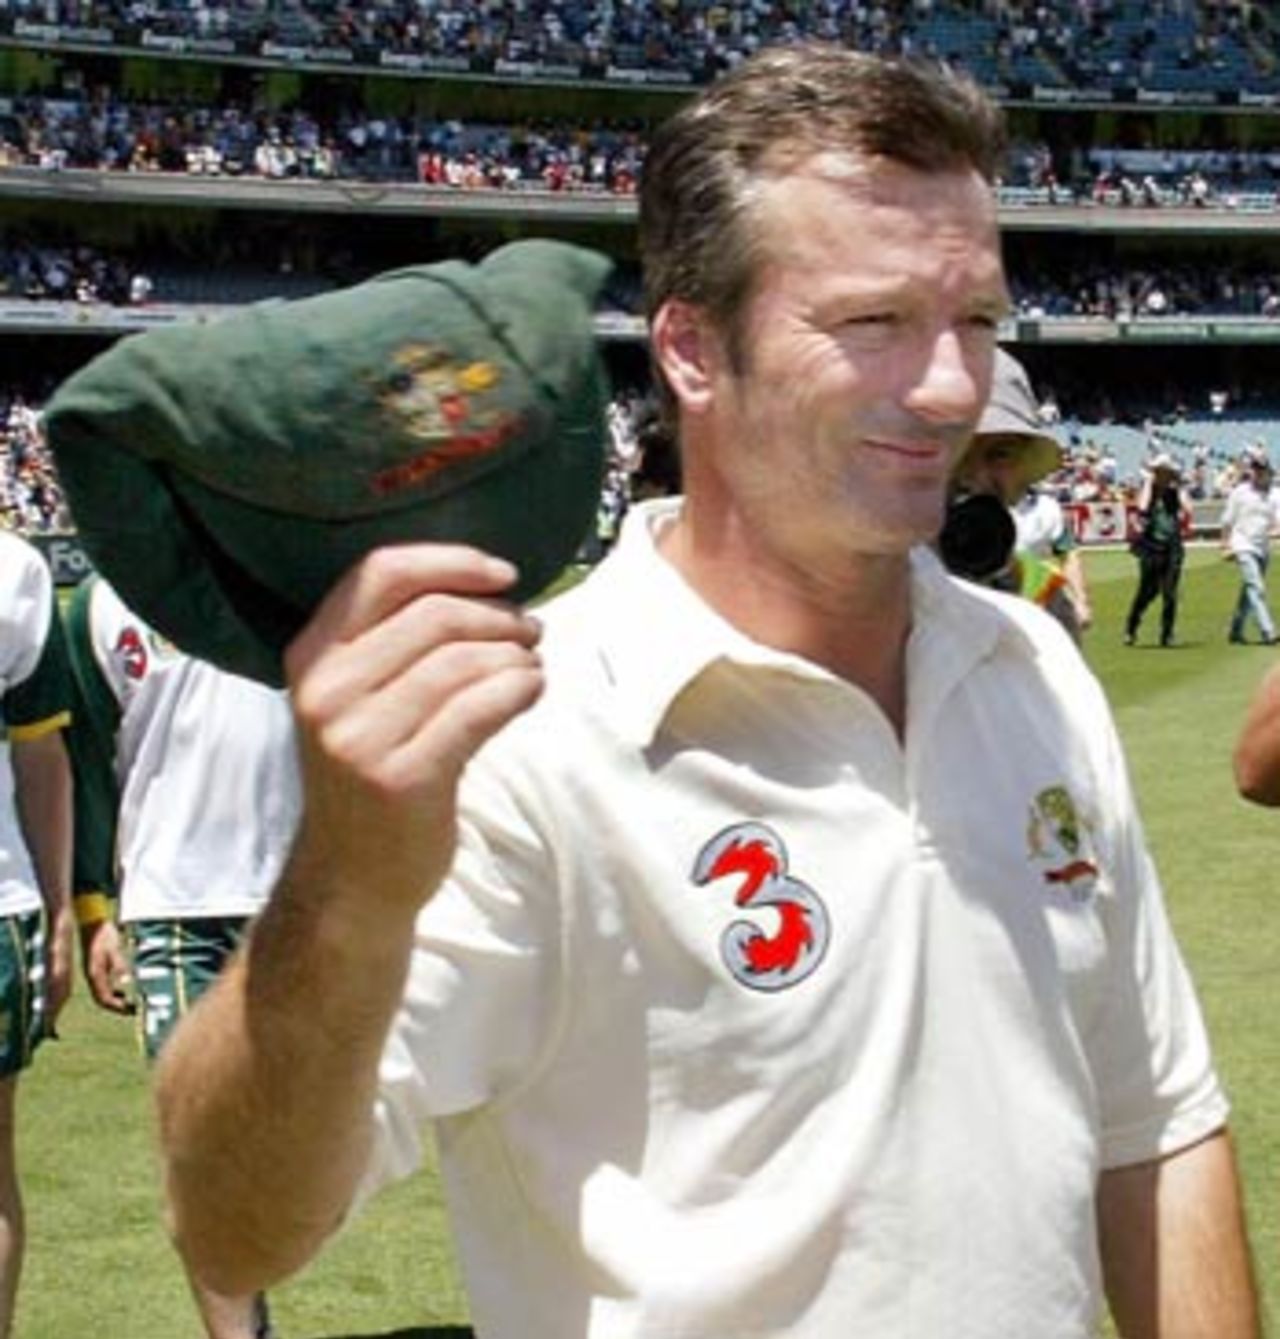 That old cap means the world to Steve Waugh, Australia v India, 3rd Test, Melbourne, 5th day, December 30, 2003